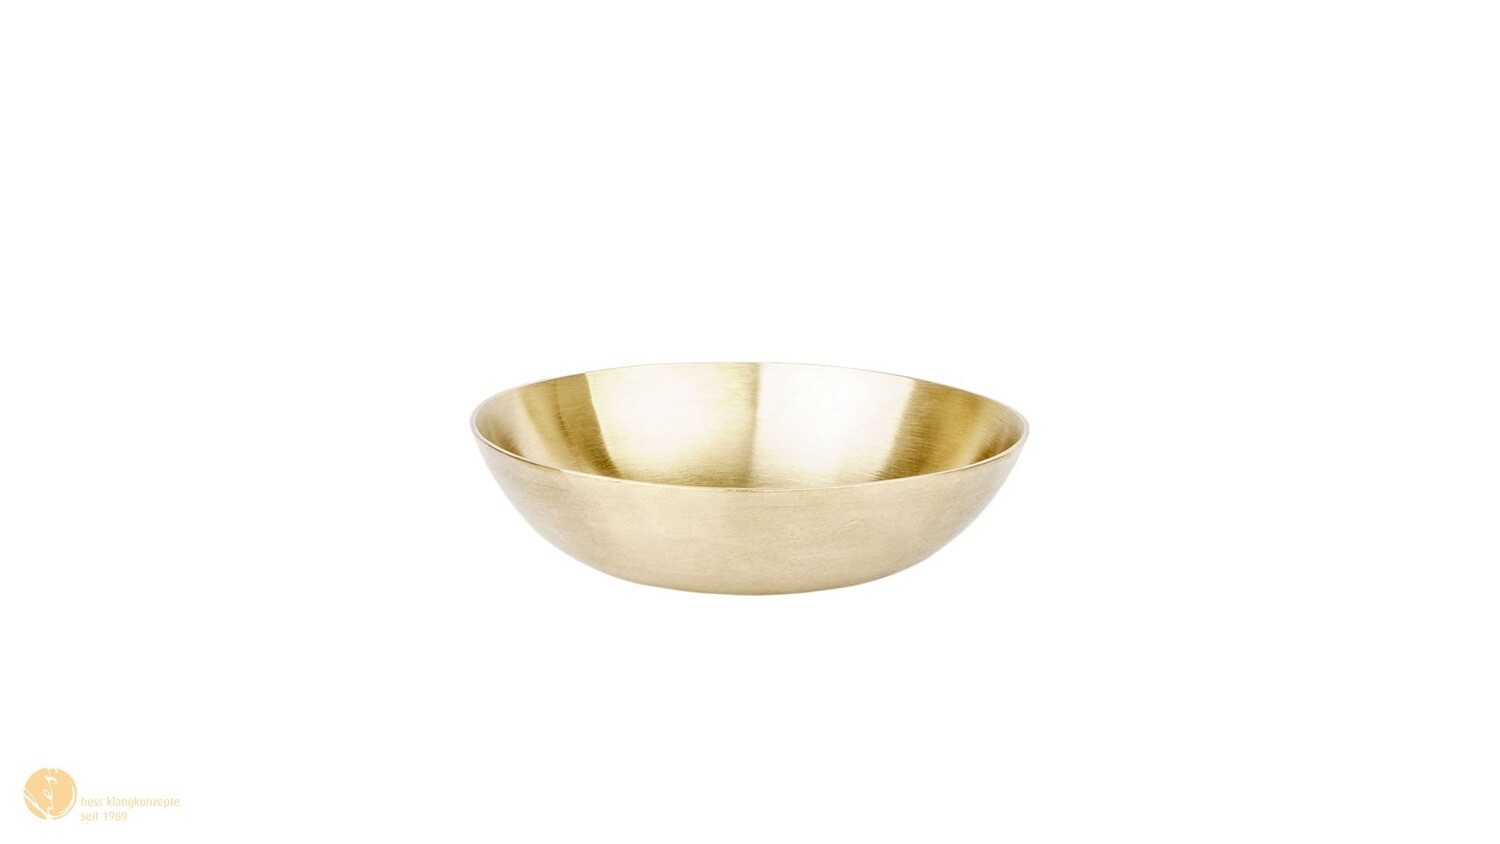 Peter Hess® Therapy Singing Bowl – Head Bowl, wide